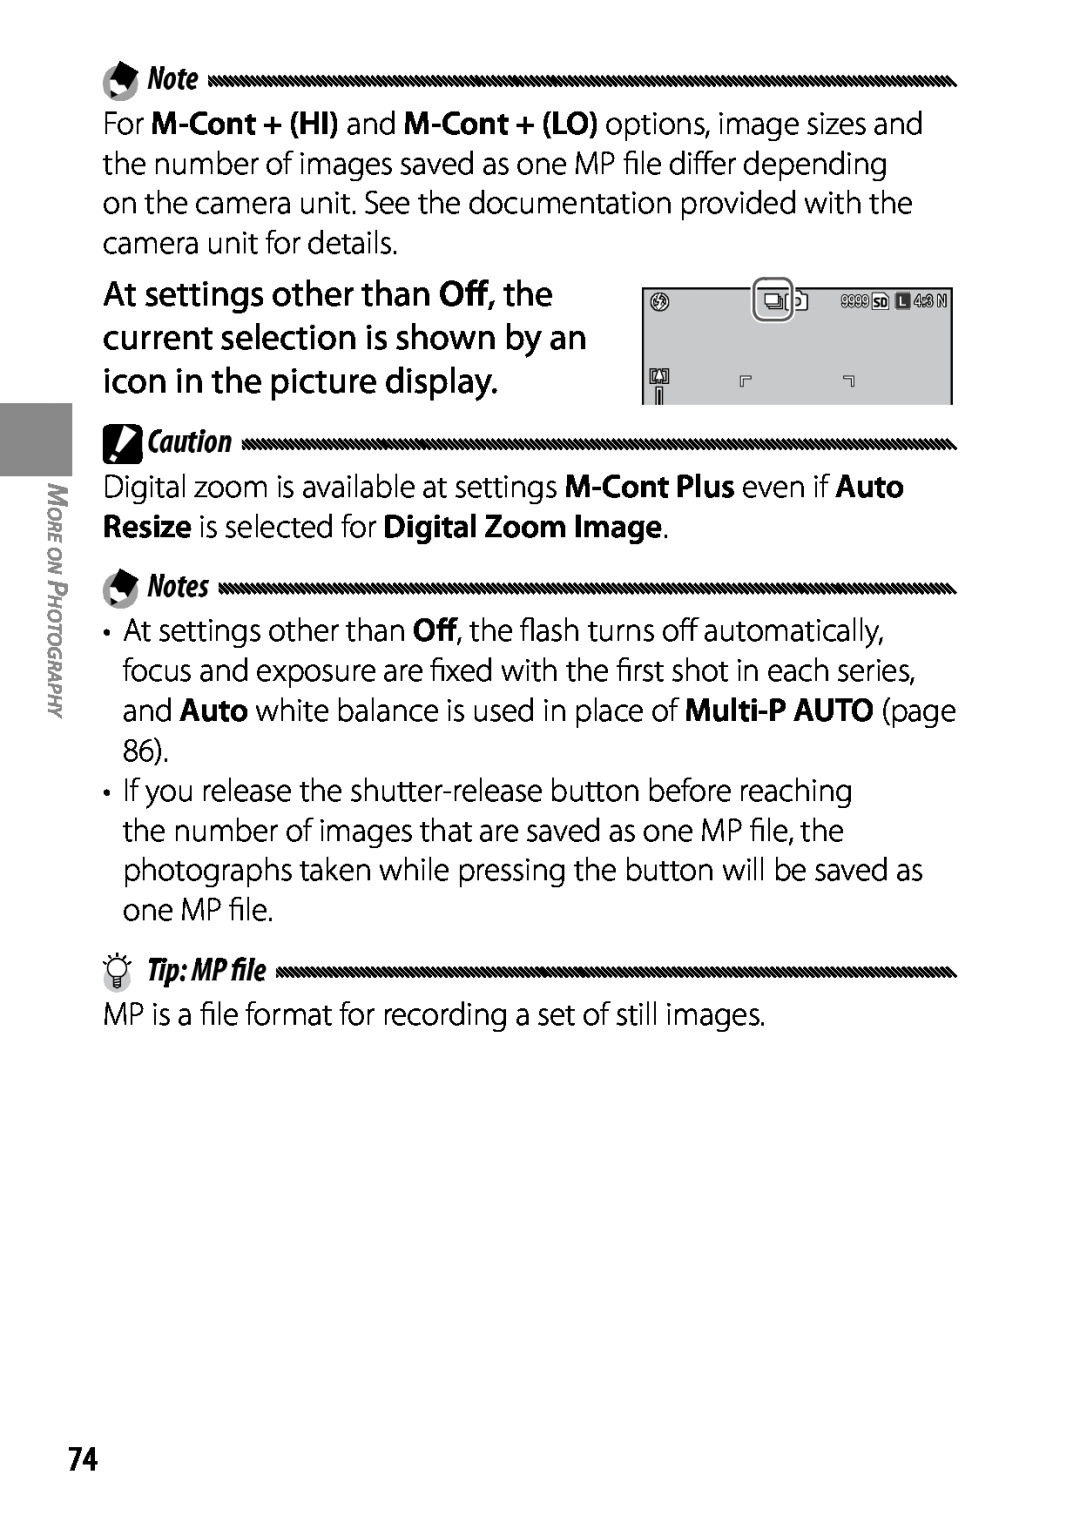 Ricoh 170553 At settings other than Off, the, current selection is shown by an, icon in the picture display, Tip MP file 